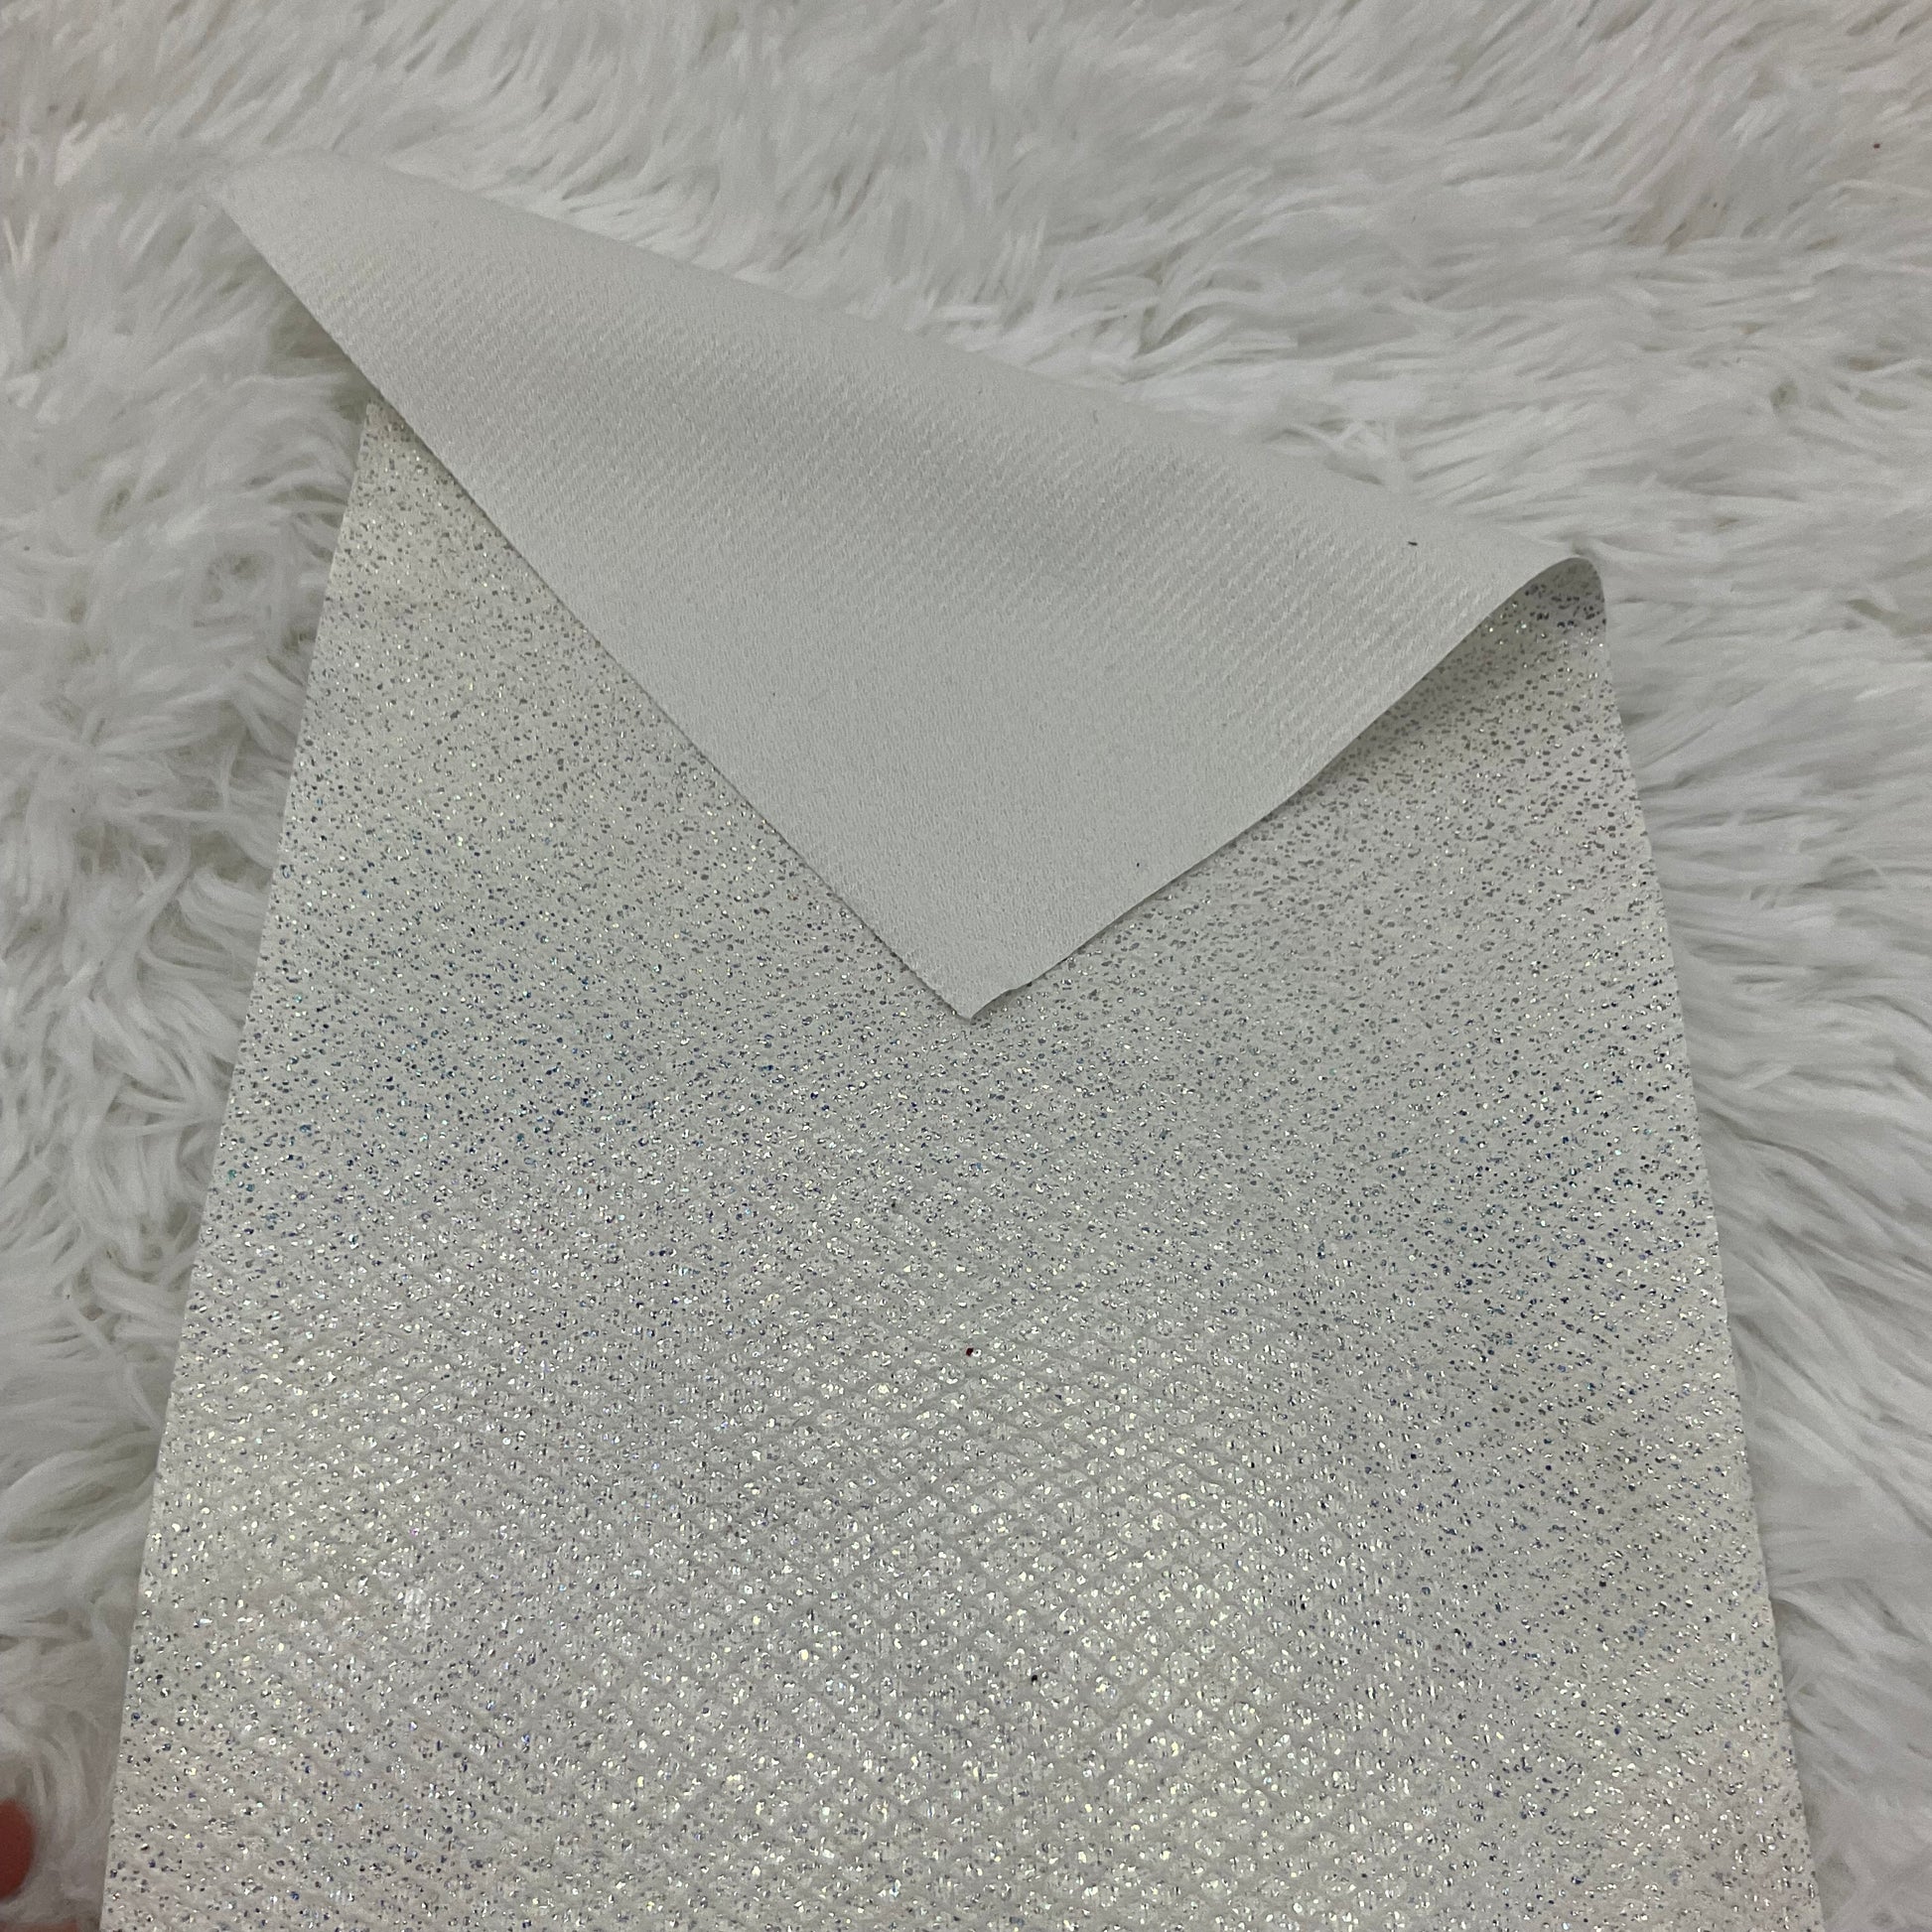 Vegan Leather and Glitter Sheets – Shak's Craft Supplies